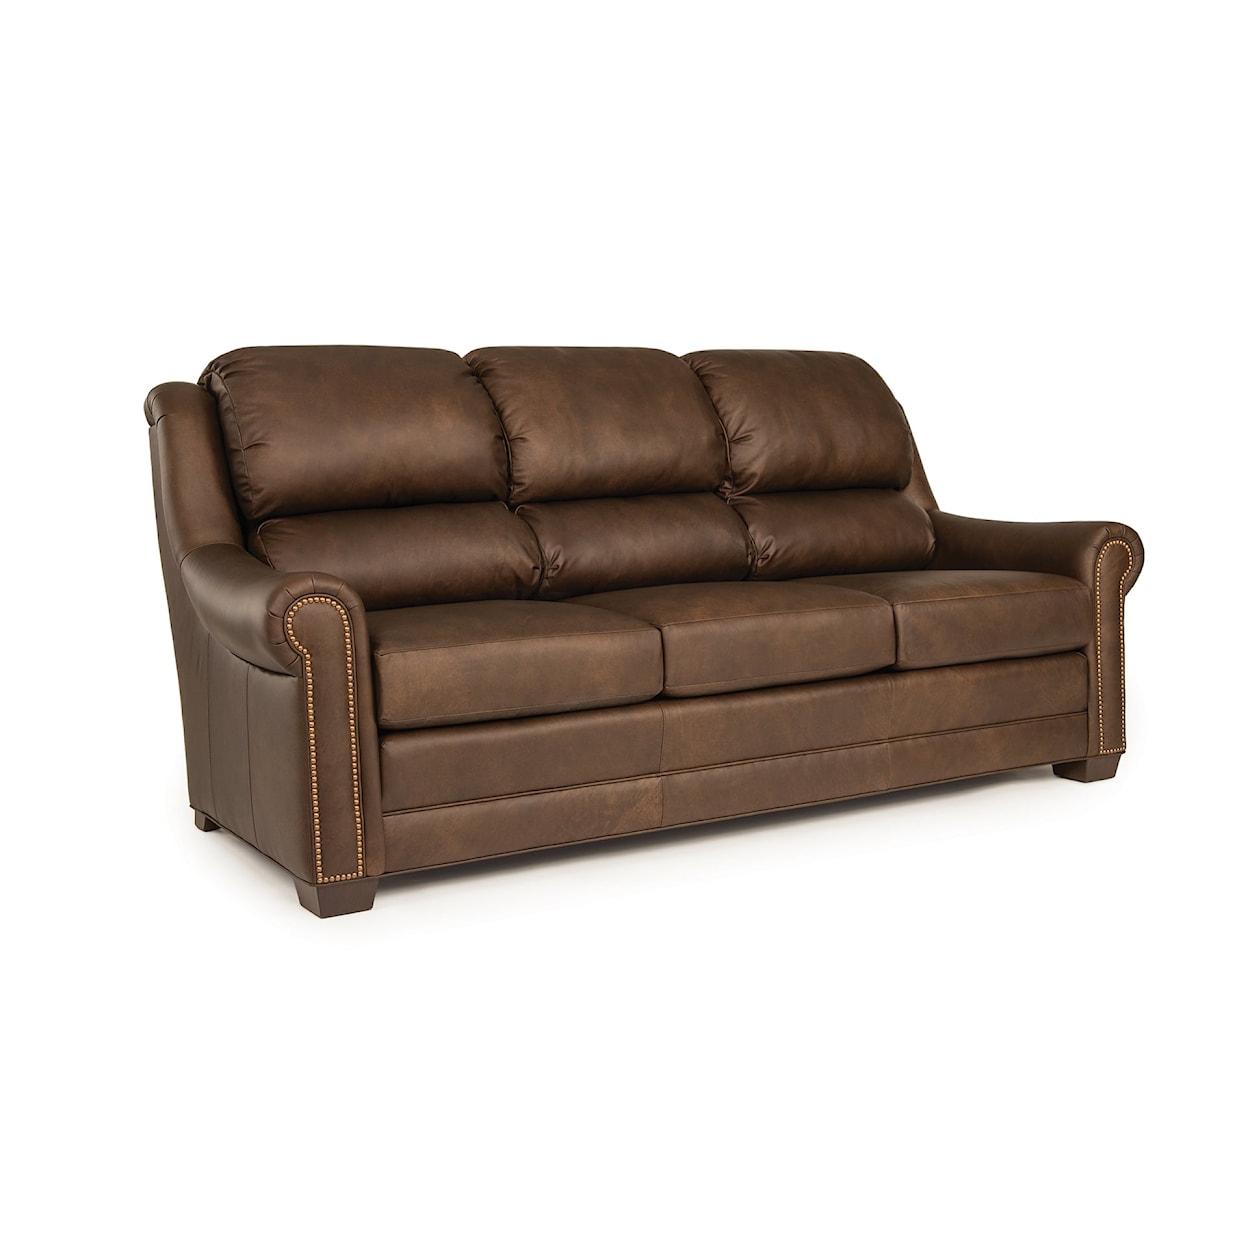 Smith Brothers 280 Large Sofa